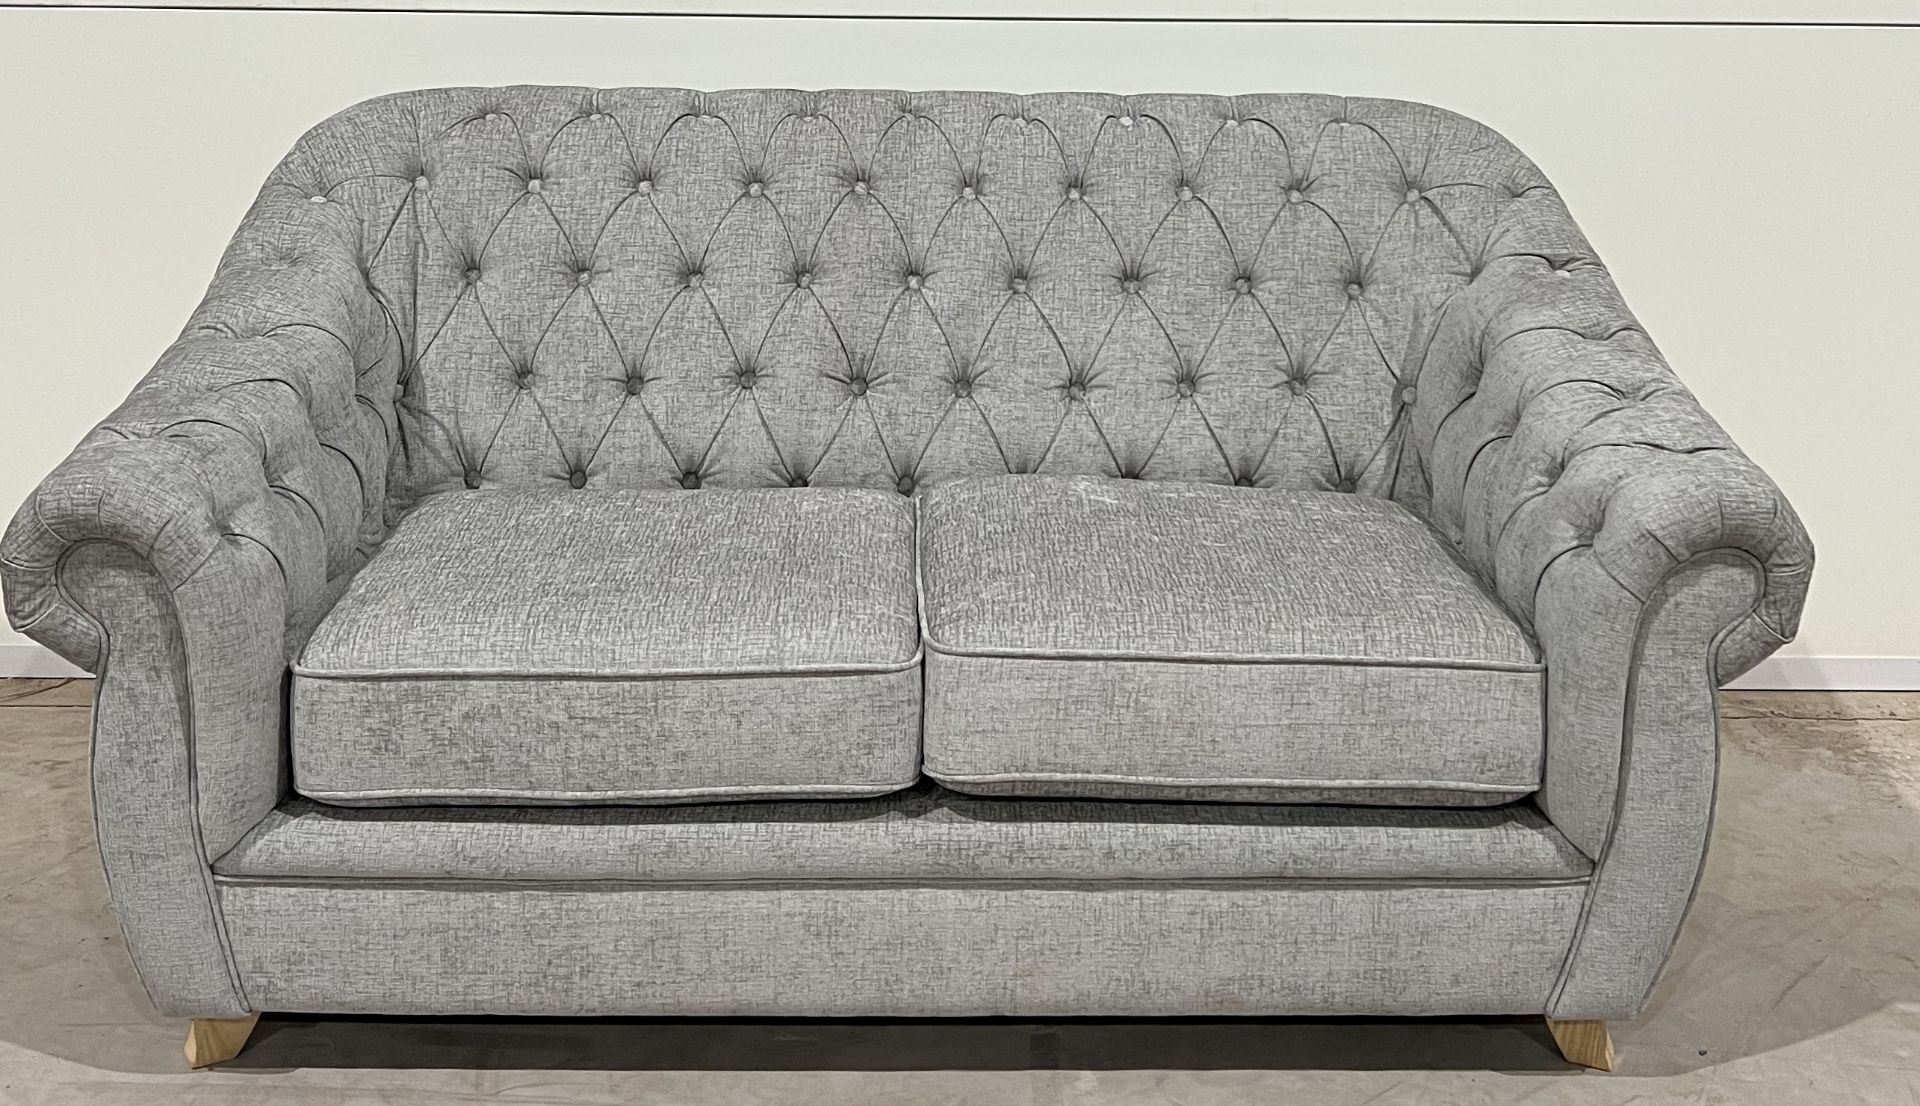 Lilly Chesterfield Grey Plush Fabric Two-Seater Sofa Featuring Deep-Buttoning, Rolled Arms And